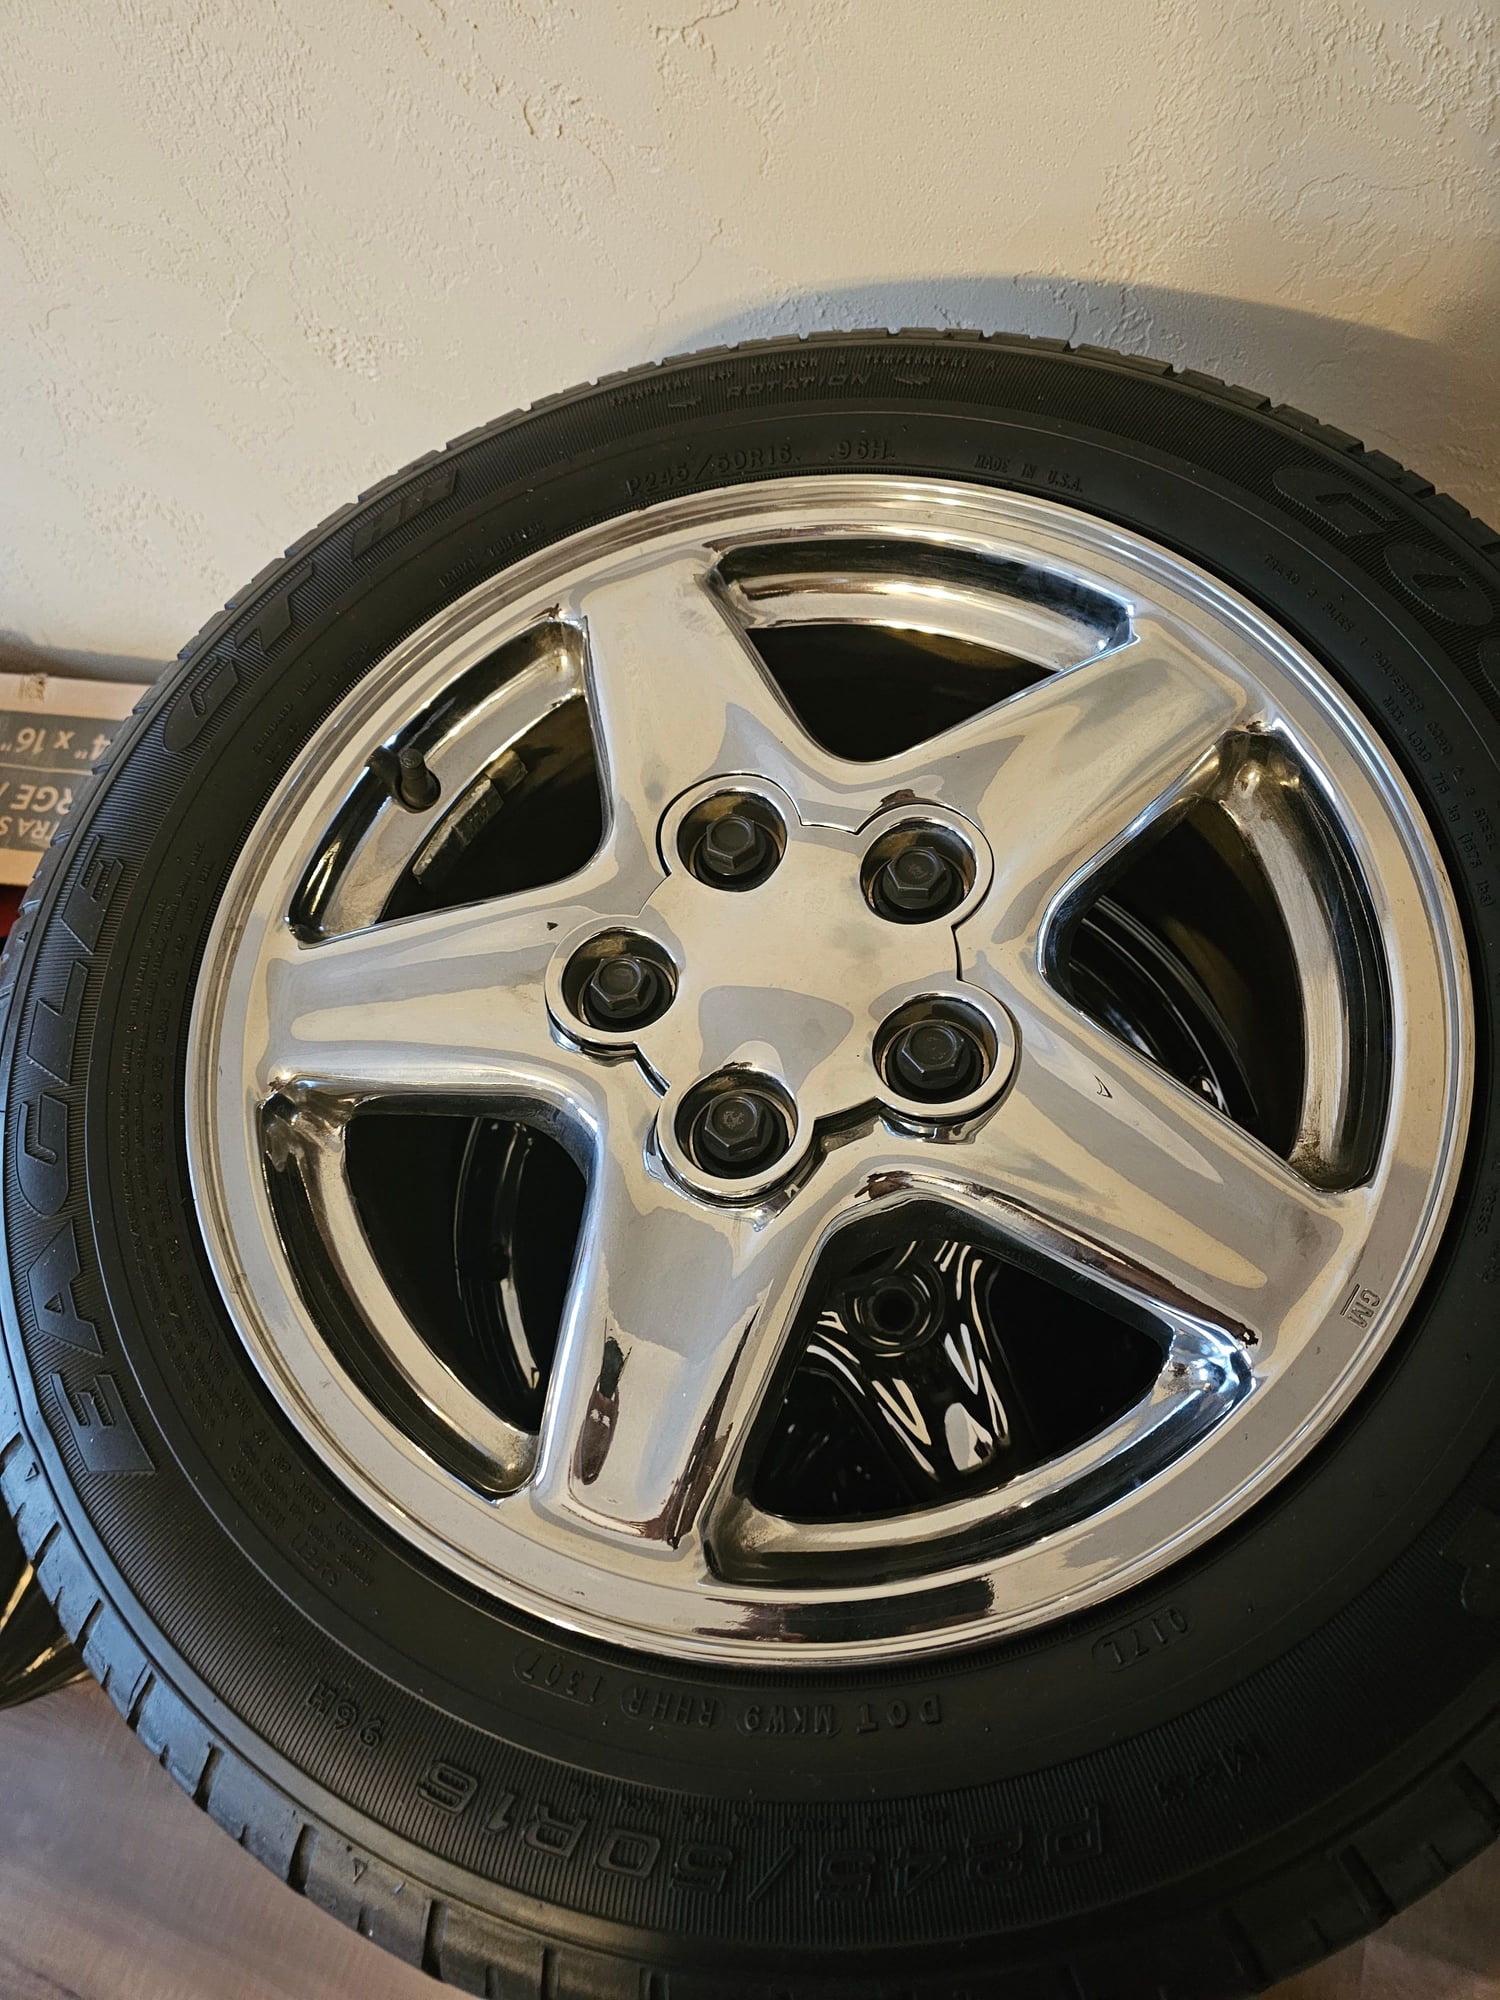 Wheels and Tires/Axles - 1998-2002 Camaro Alloy Wheels - Used - Decatur, IL 62526, United States